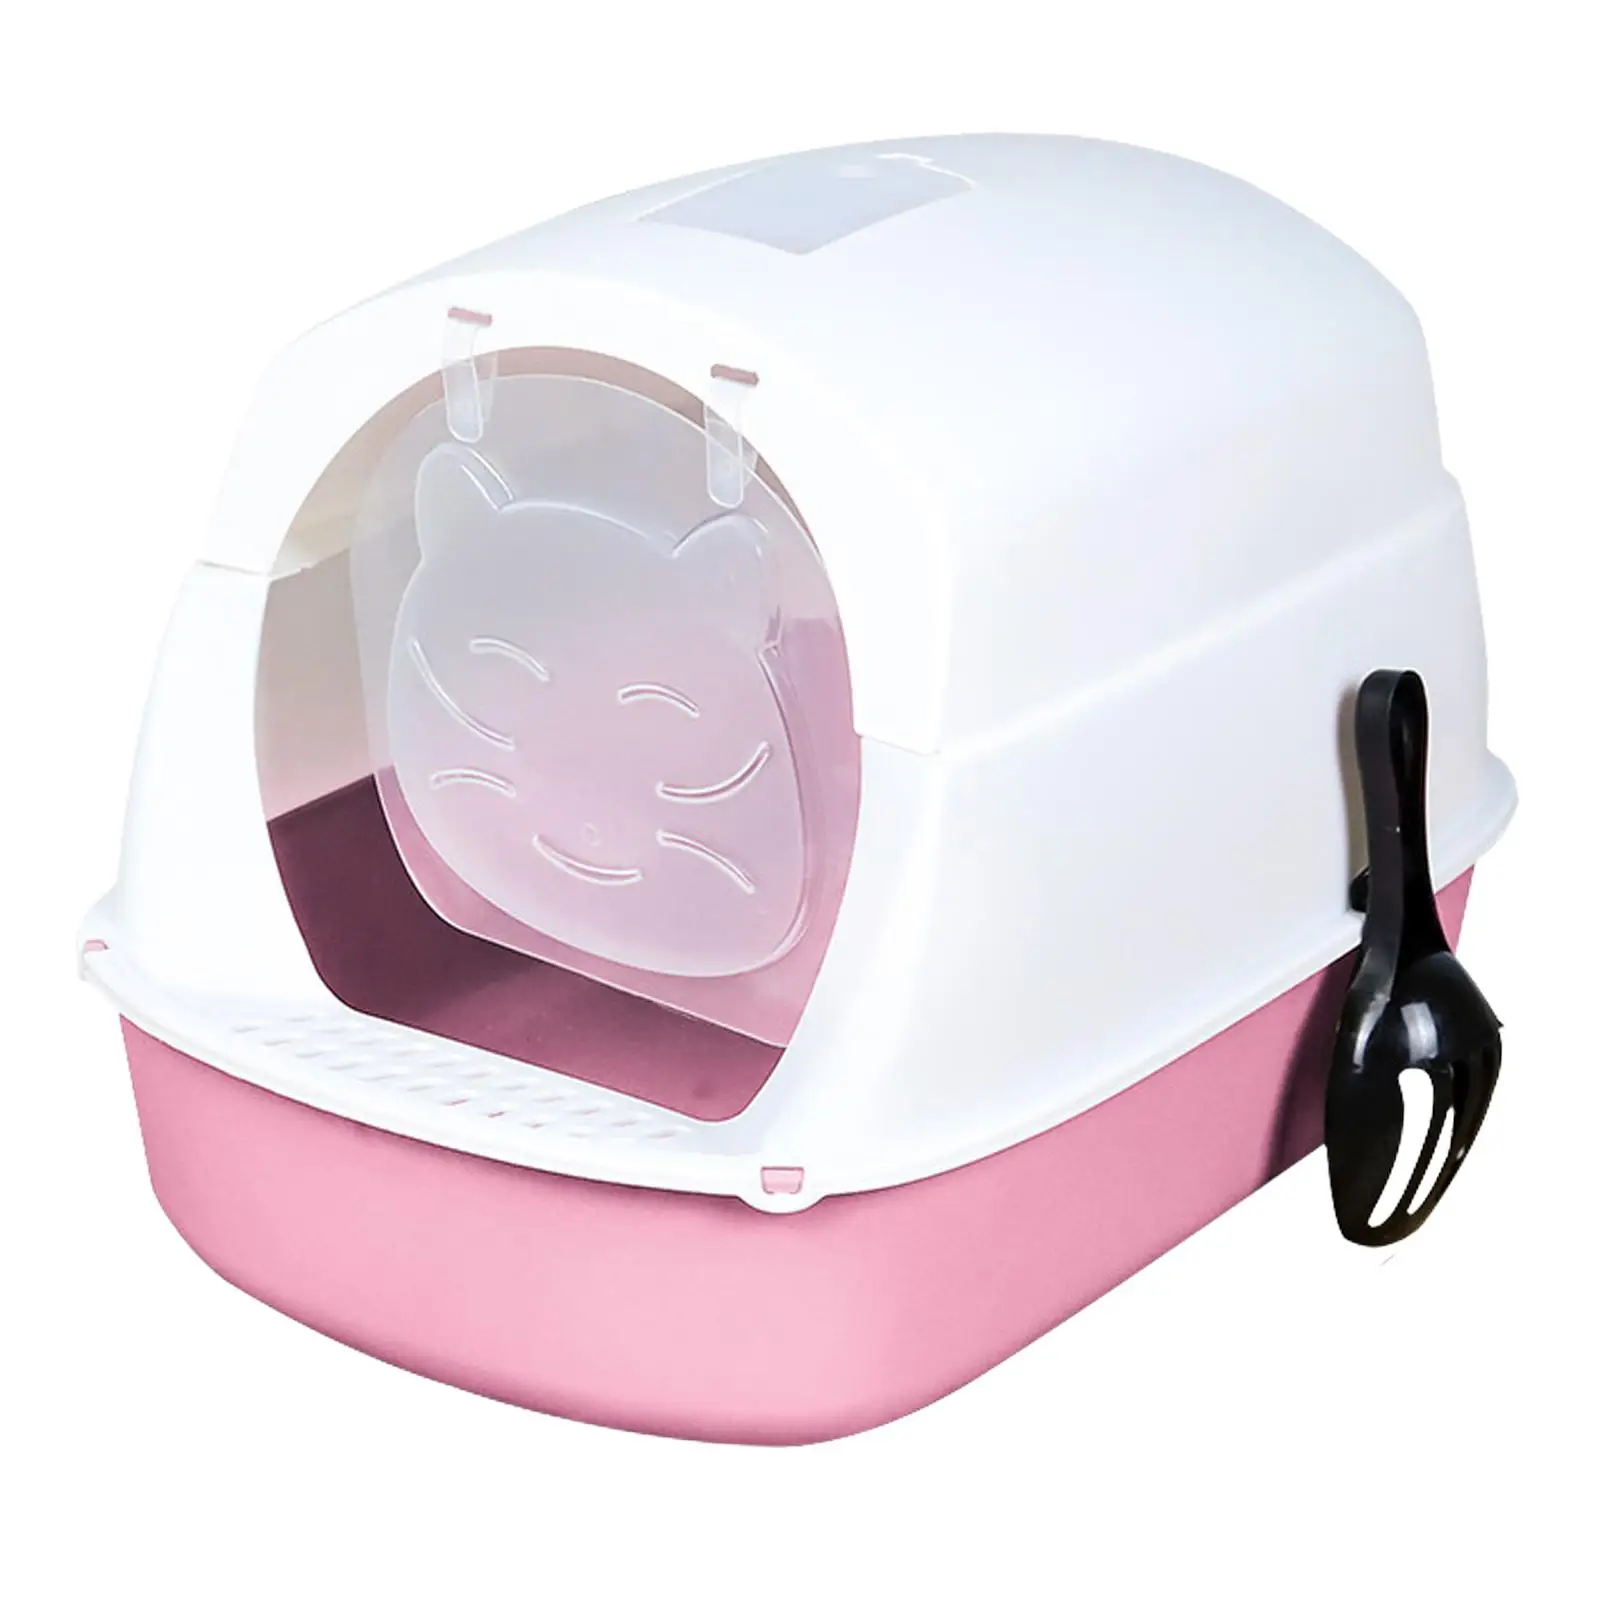 Hooded Cat Litter Box with Lid Enclosed and Covered Cat Toilet with Door Portable Cat Litter Tray Pet Litter Box Pet Accessories